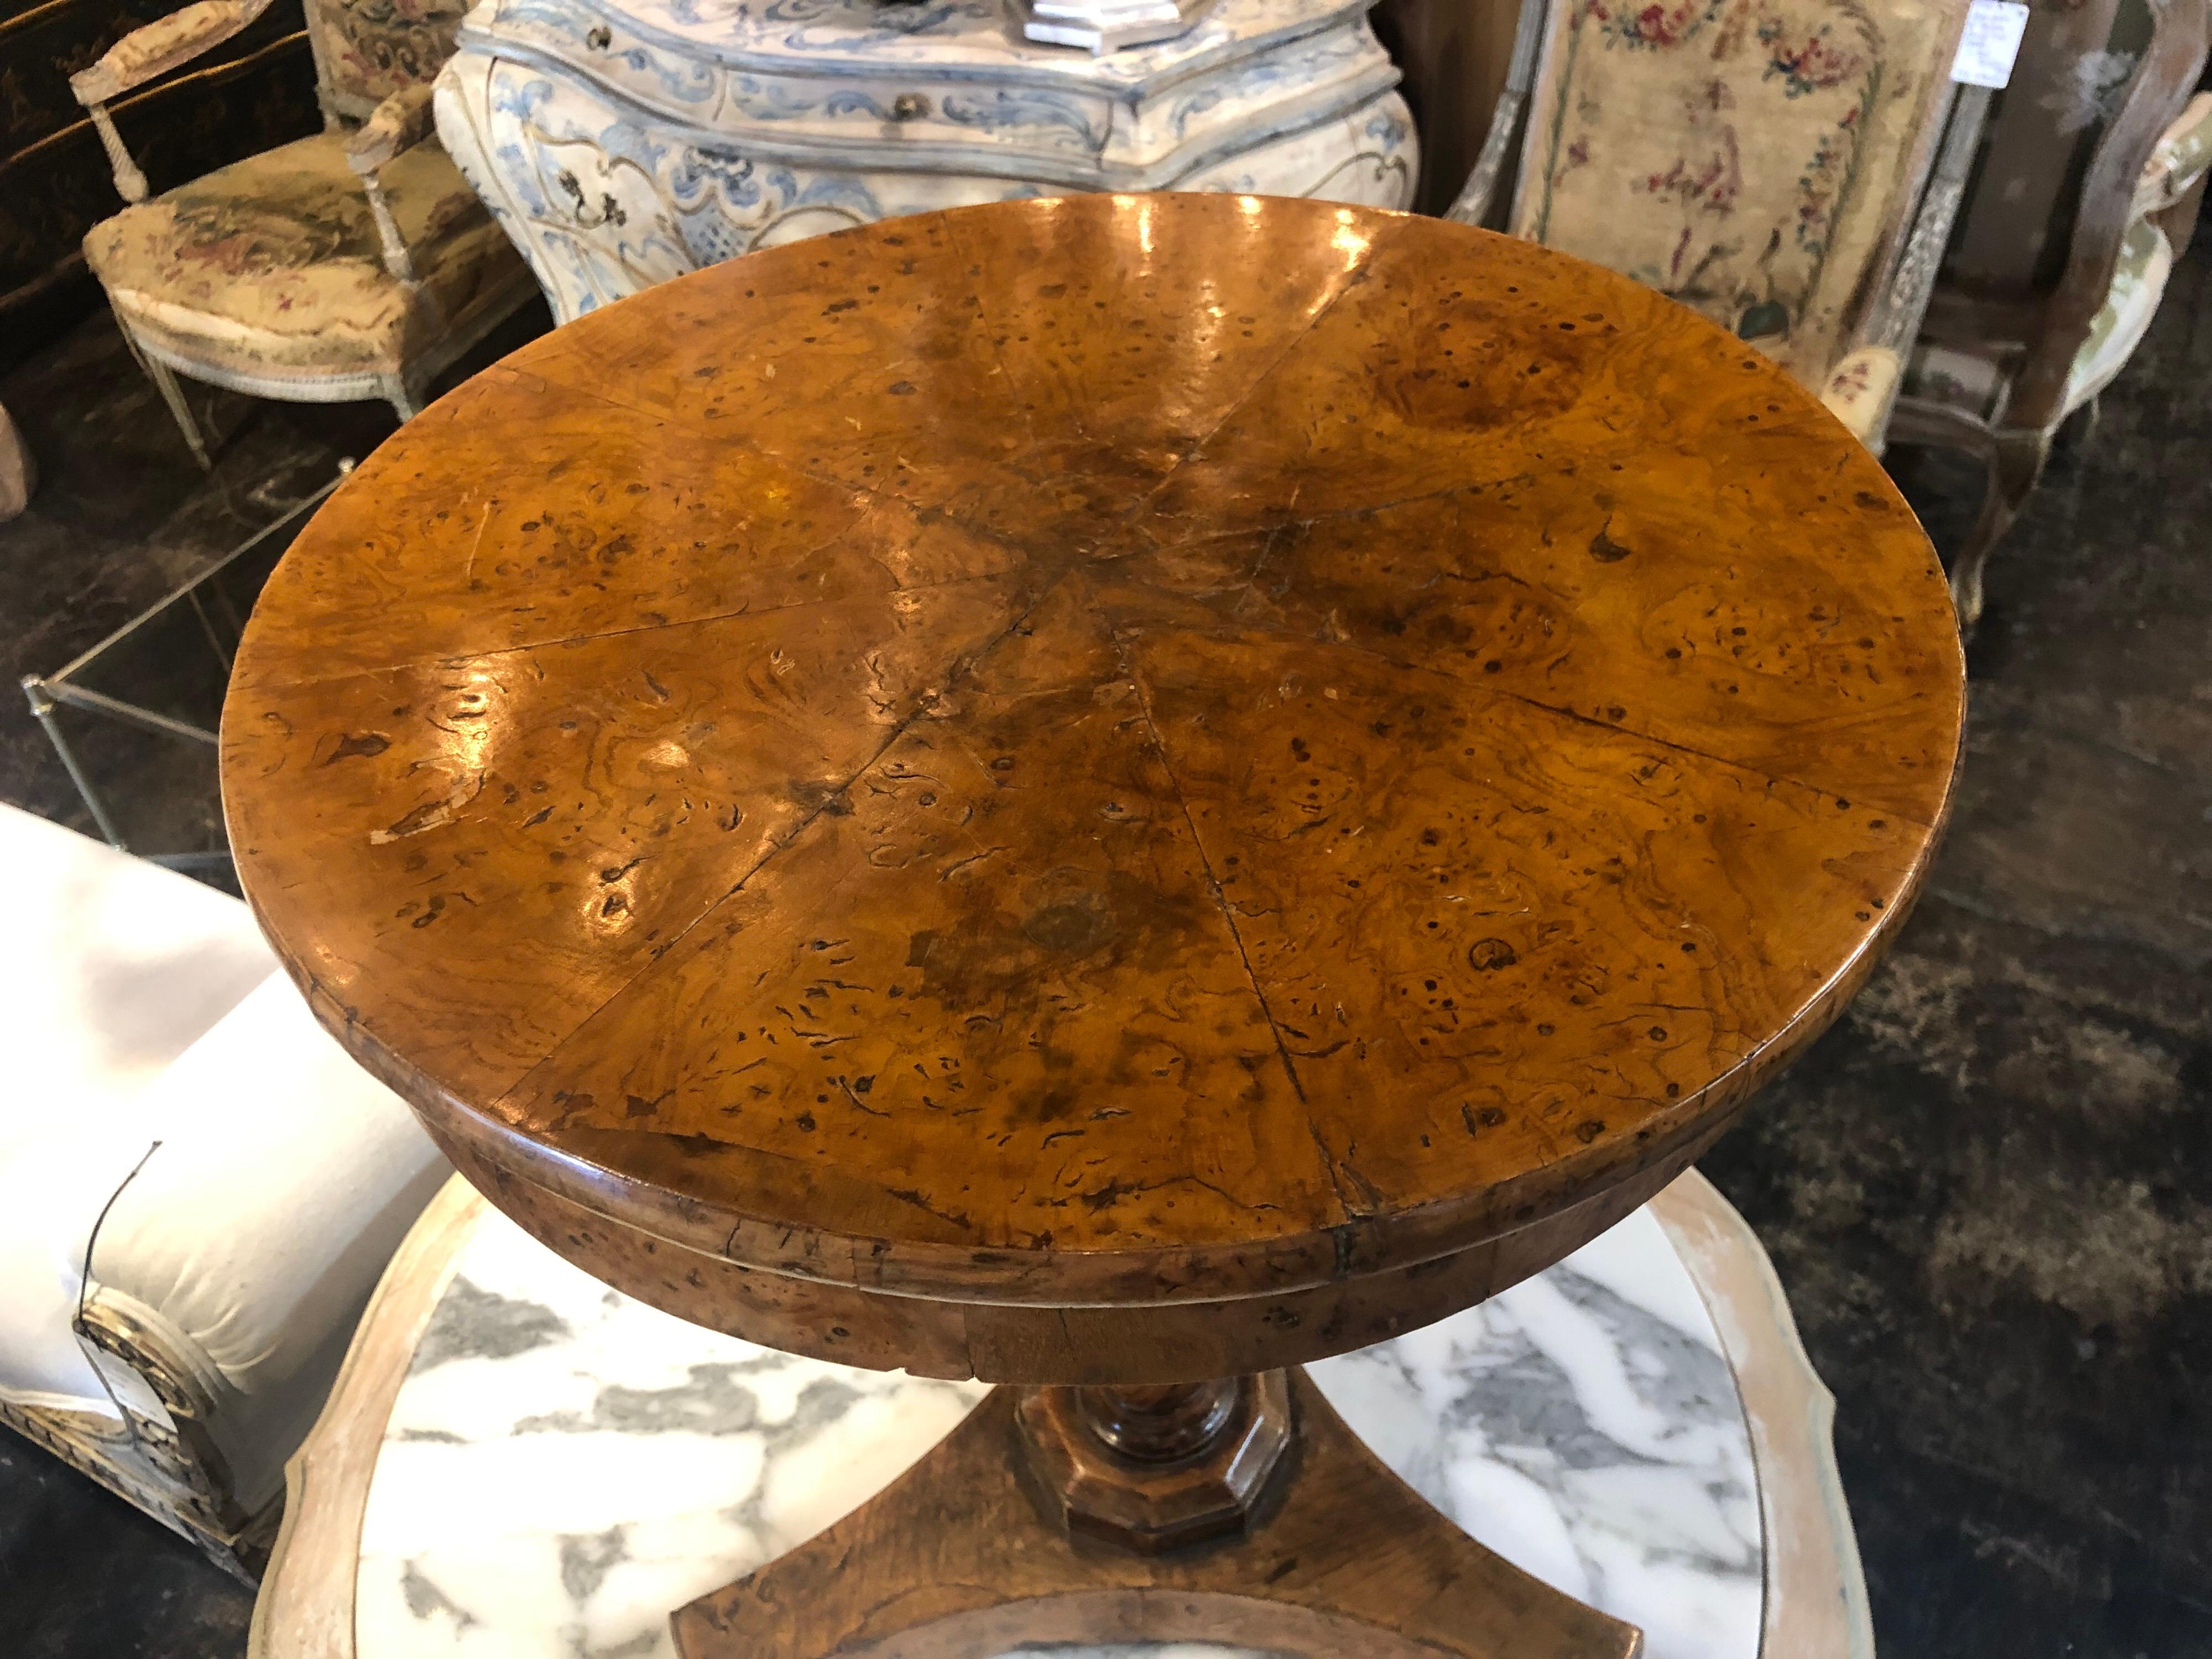 Beautiful late 19th century Biedermeier burl walnut side table. A very nice table that works well in a variety of styles and spaces.